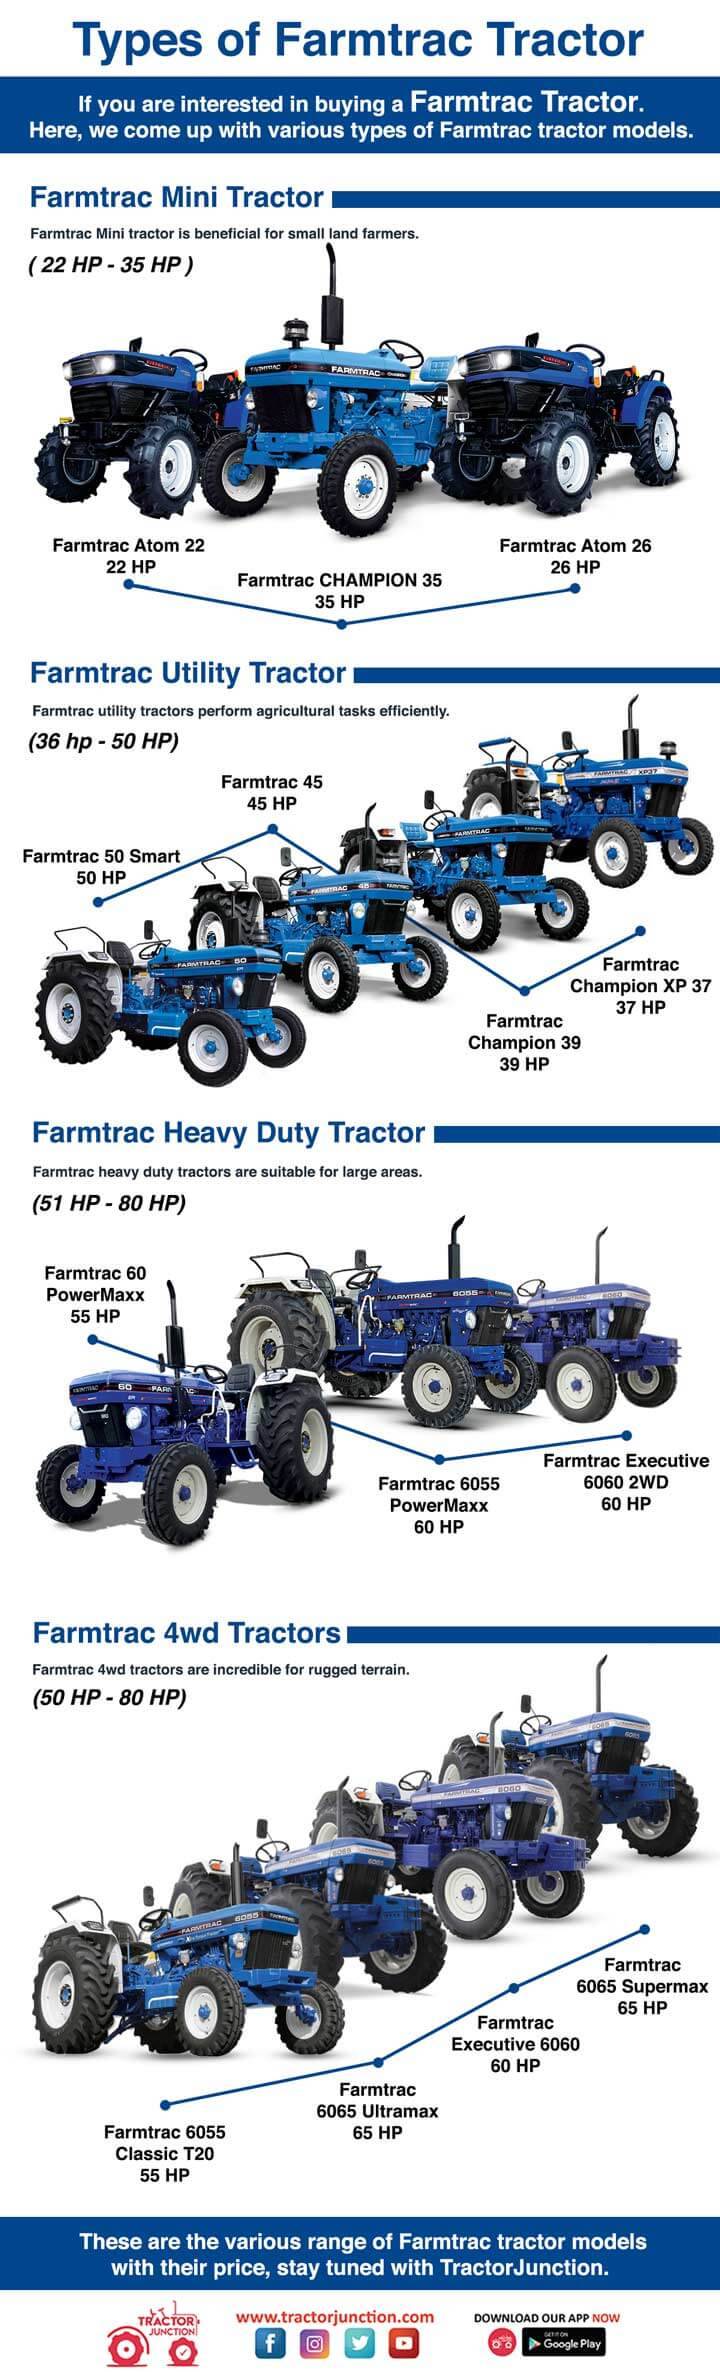 Types of Farmtrac Tractor in India- Infographic